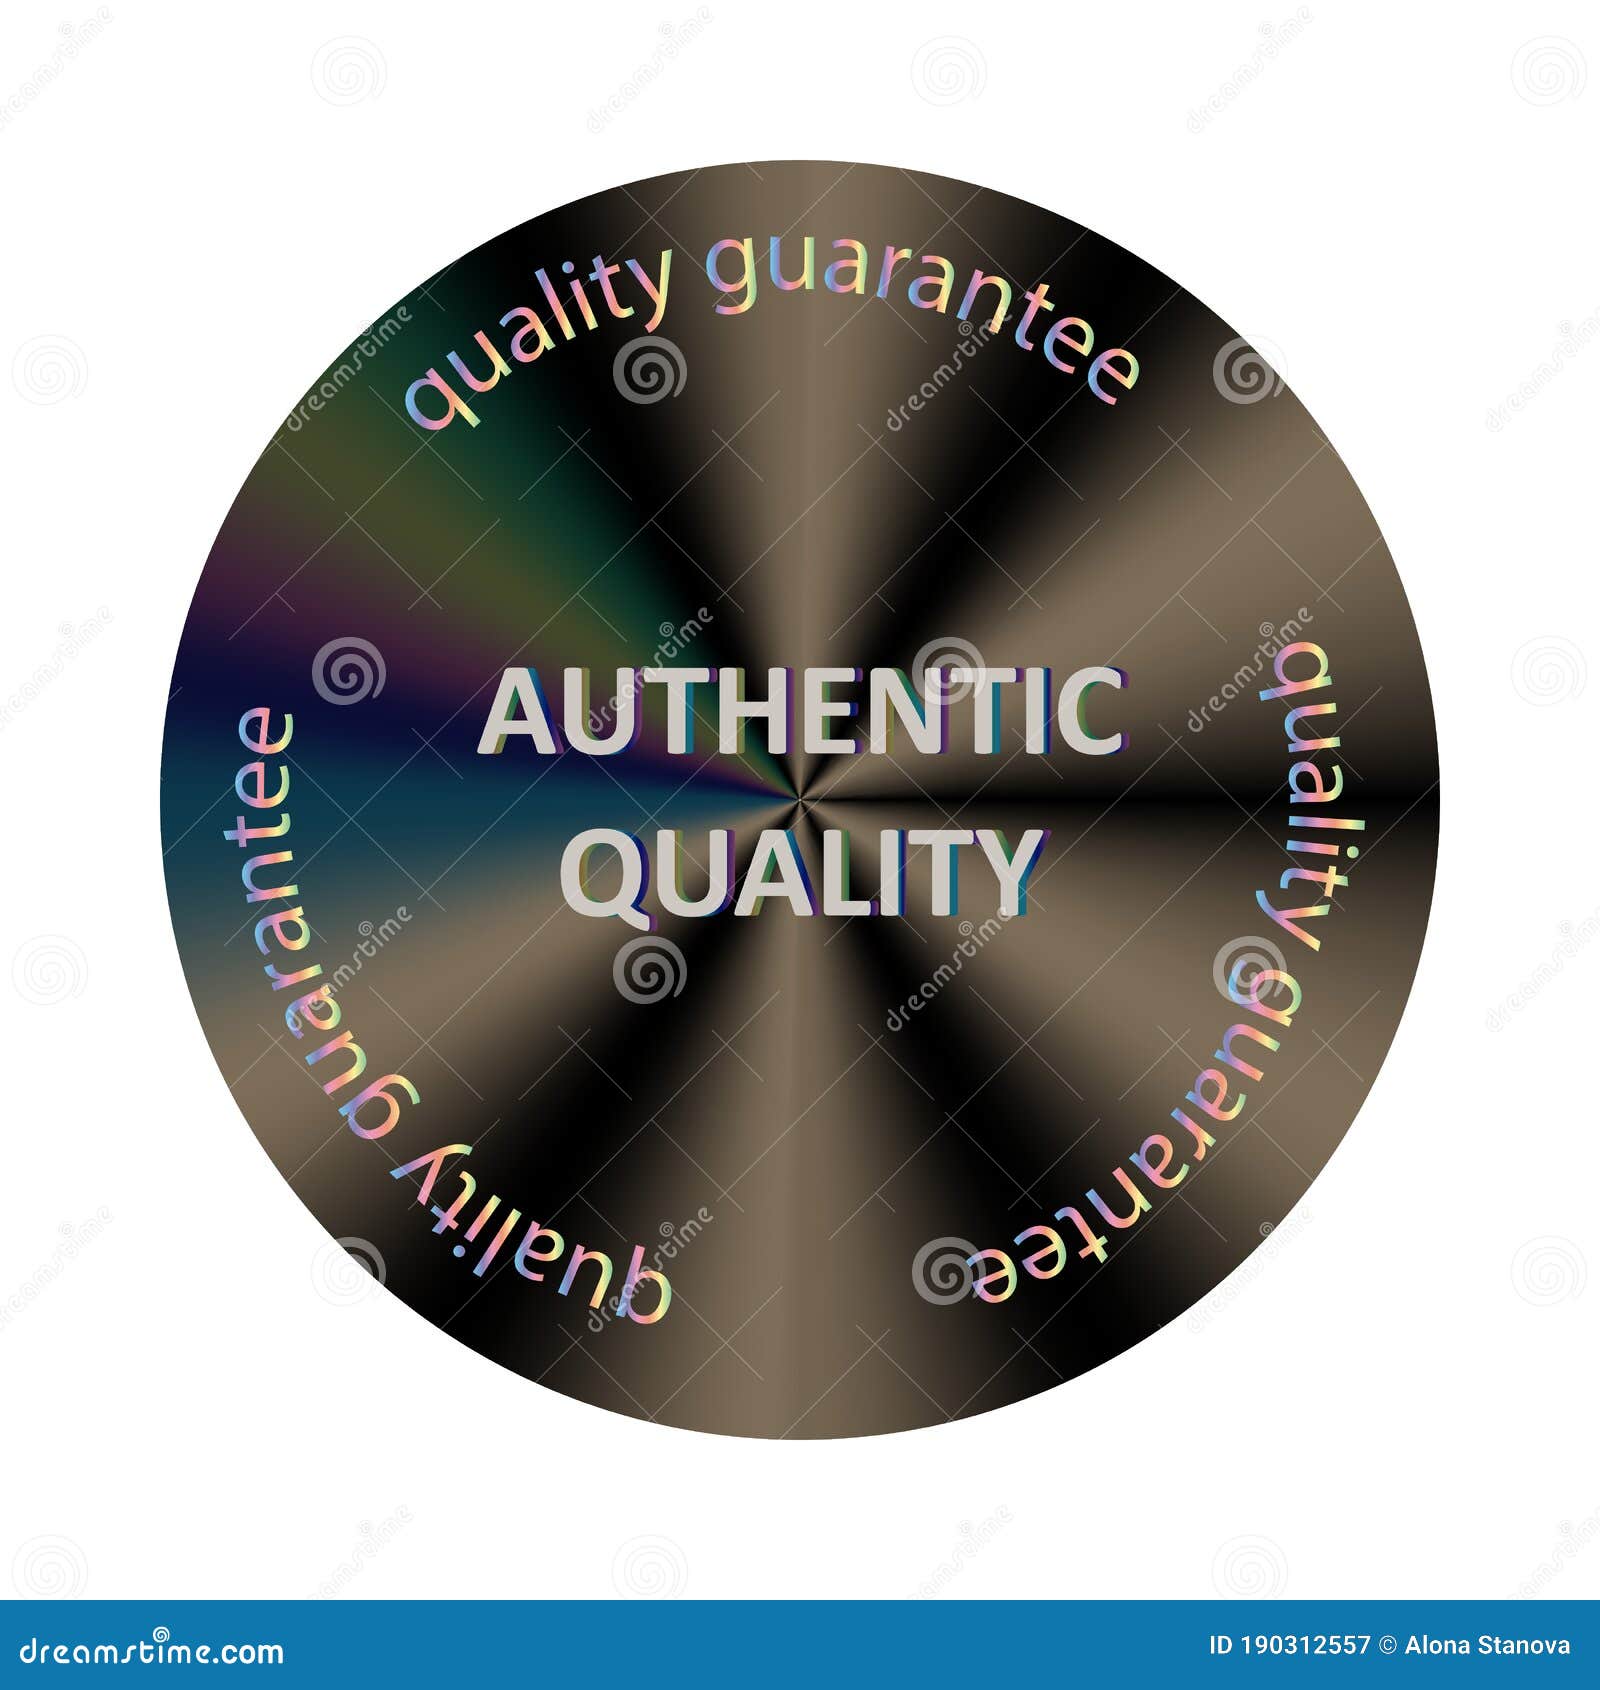 Quality, Trusted Seller Badge Set, Edittable Vector Illustrations